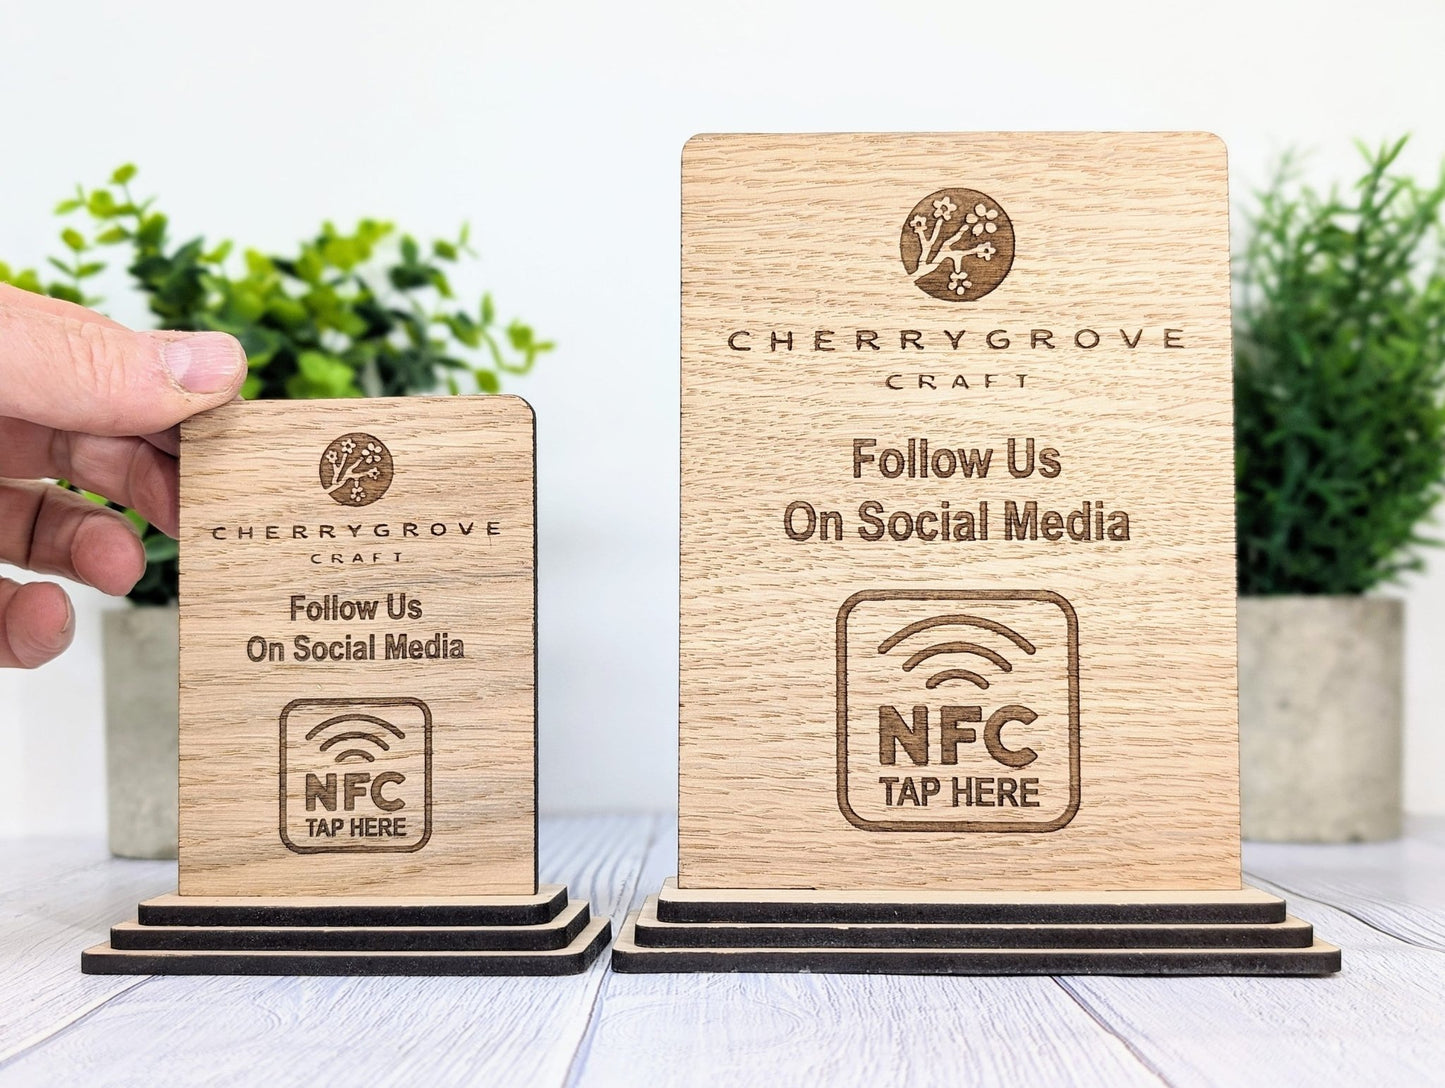 NFC 'Tap Here' Wooden Follow Us Sign - Personalised Logo, Eco-Friendly, Handmade, Social Media Link, NFC tag, 2 Sizes - CherryGroveCraft